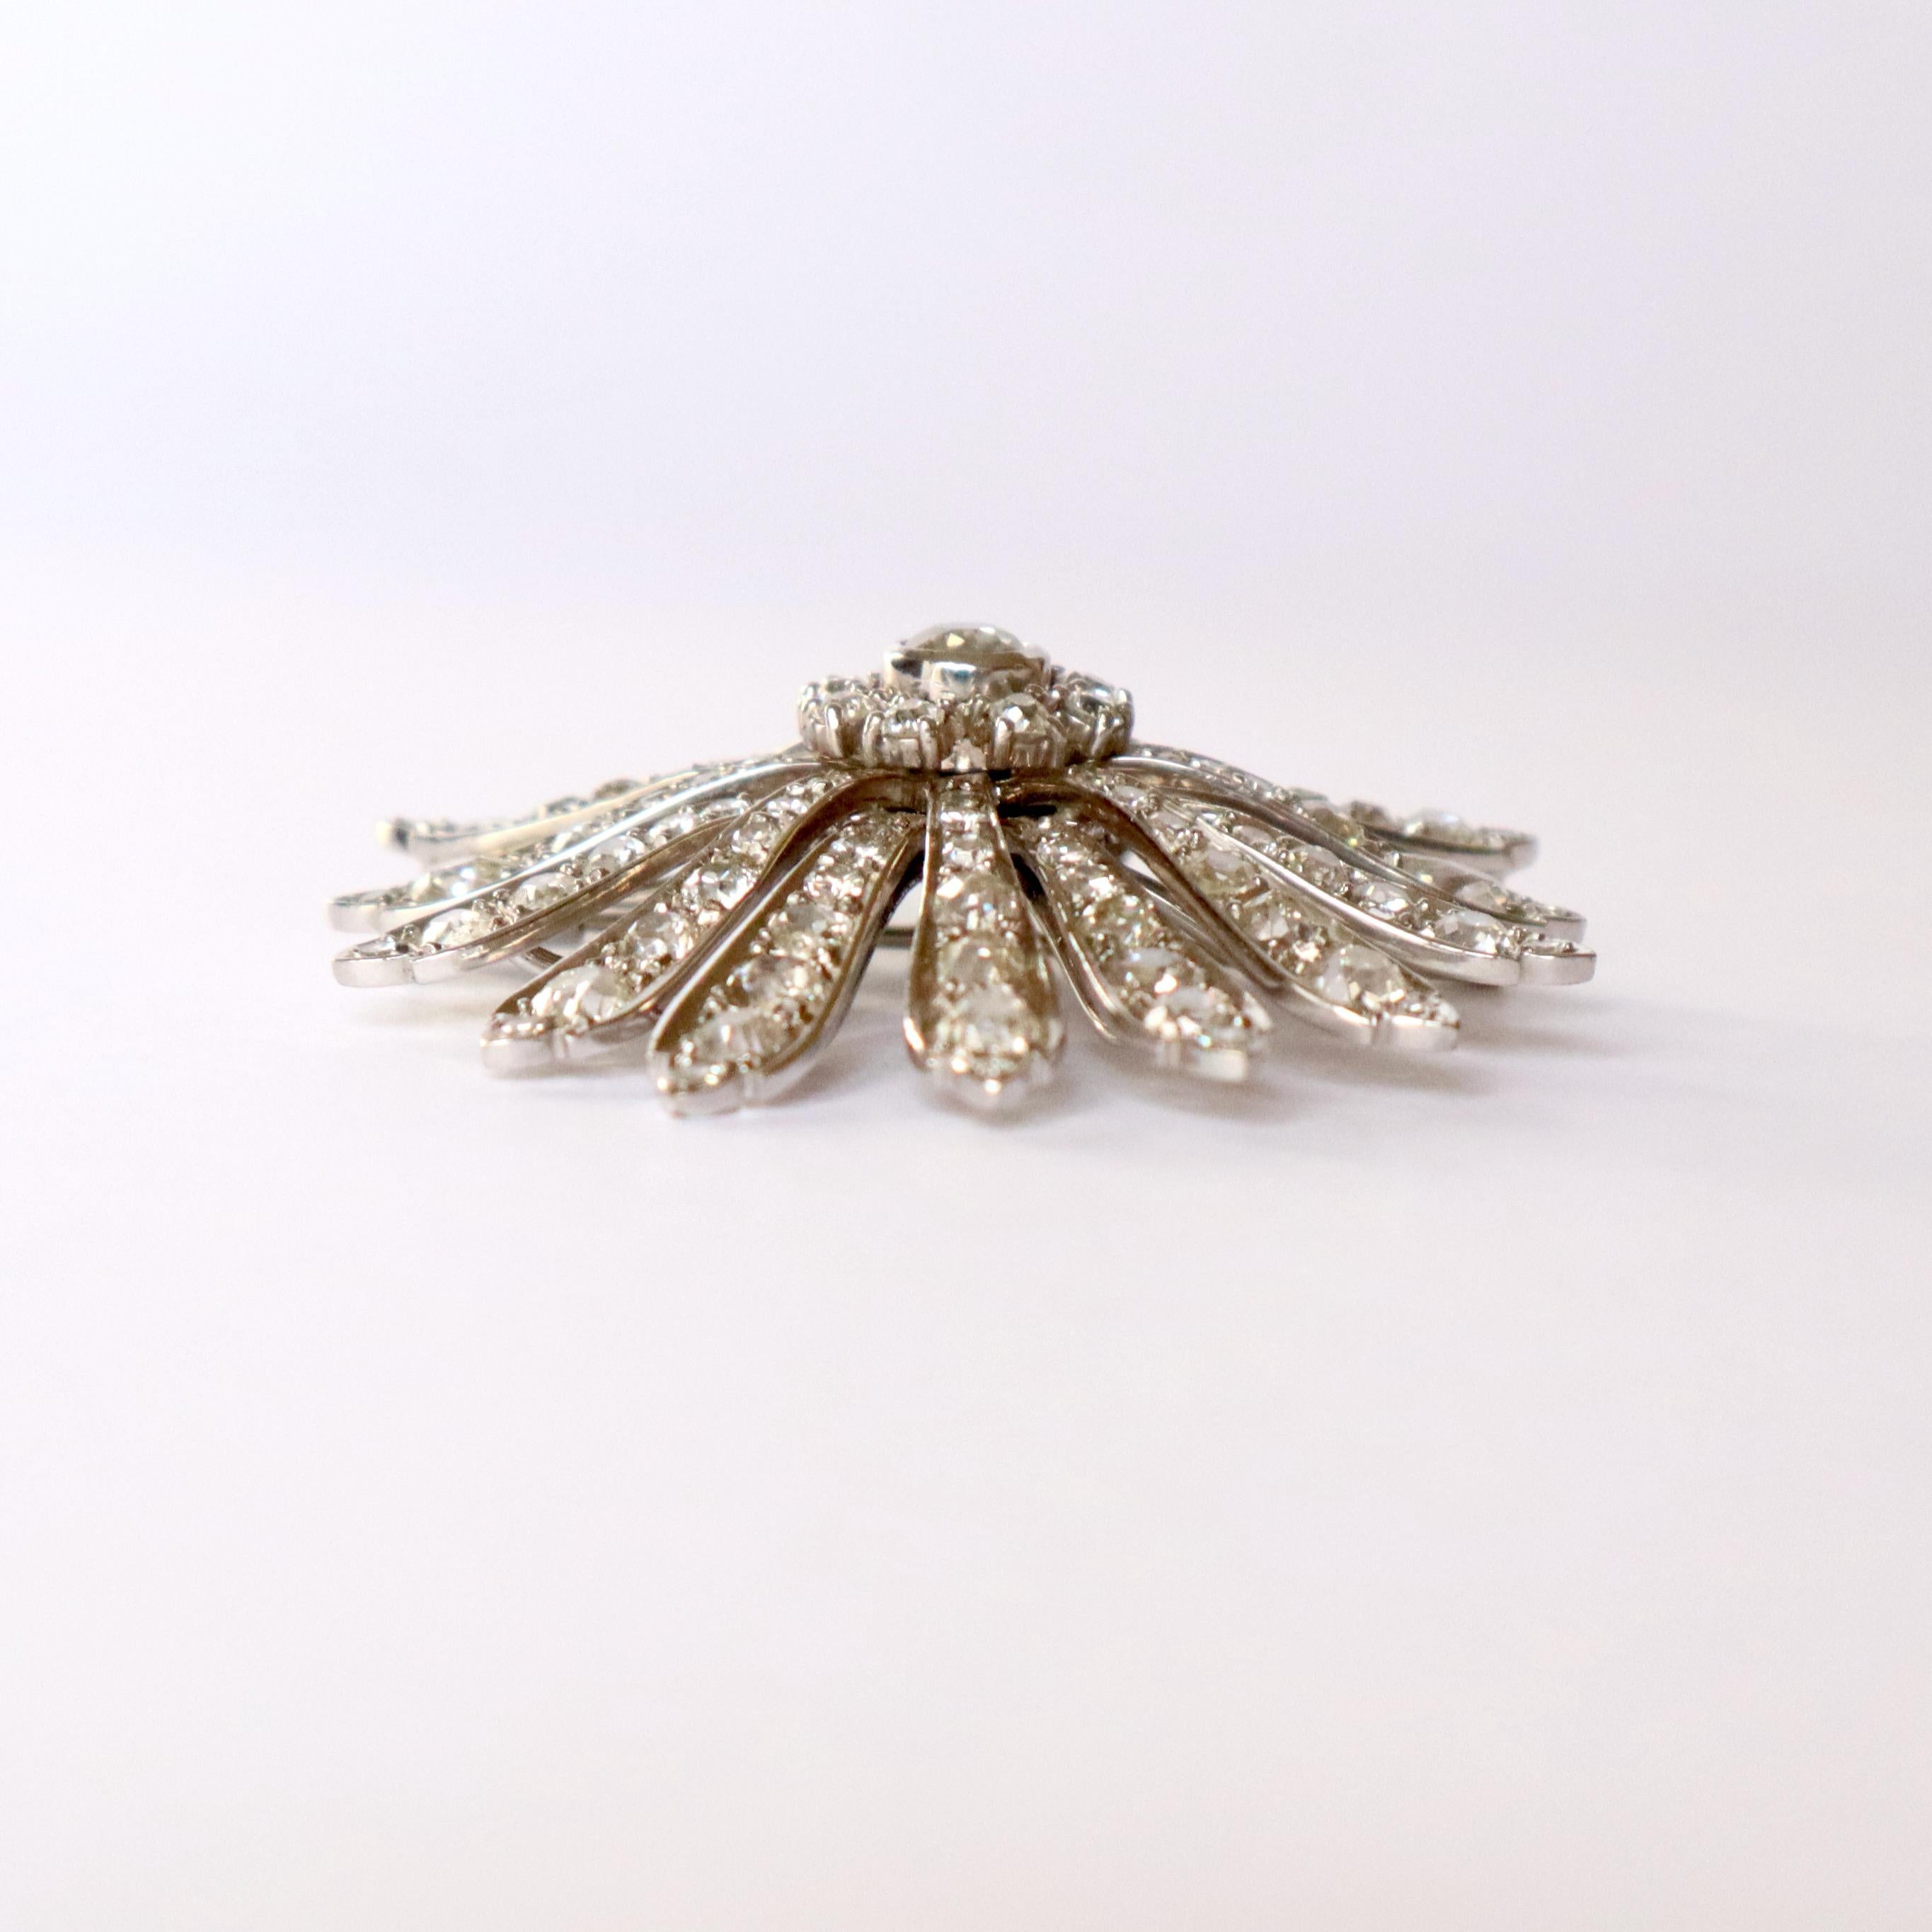 Vintage Daisy Brooch circa 1900-1930 in 18 Carat White Gold and Diamonds For Sale 4